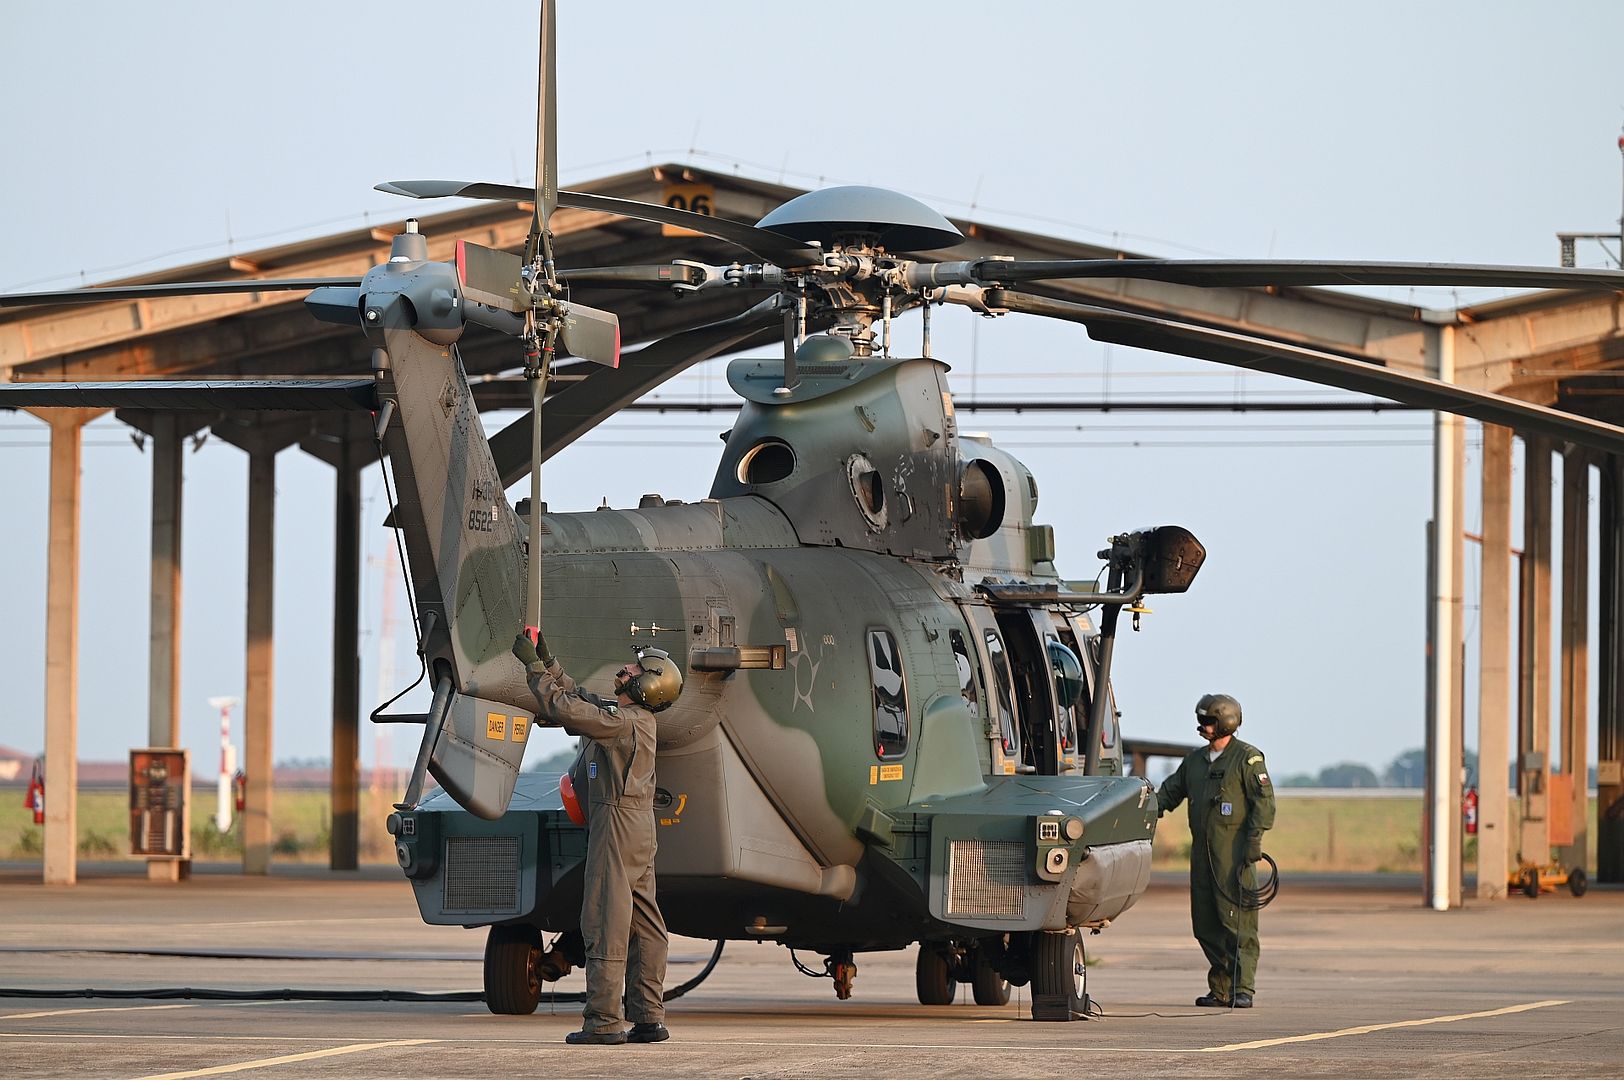 Eurocopter EC725 Caracal Helicopter Assigned To Brazilian Air Base Campo Grande Prepares To Take Off On A Search And Rescue Exercise